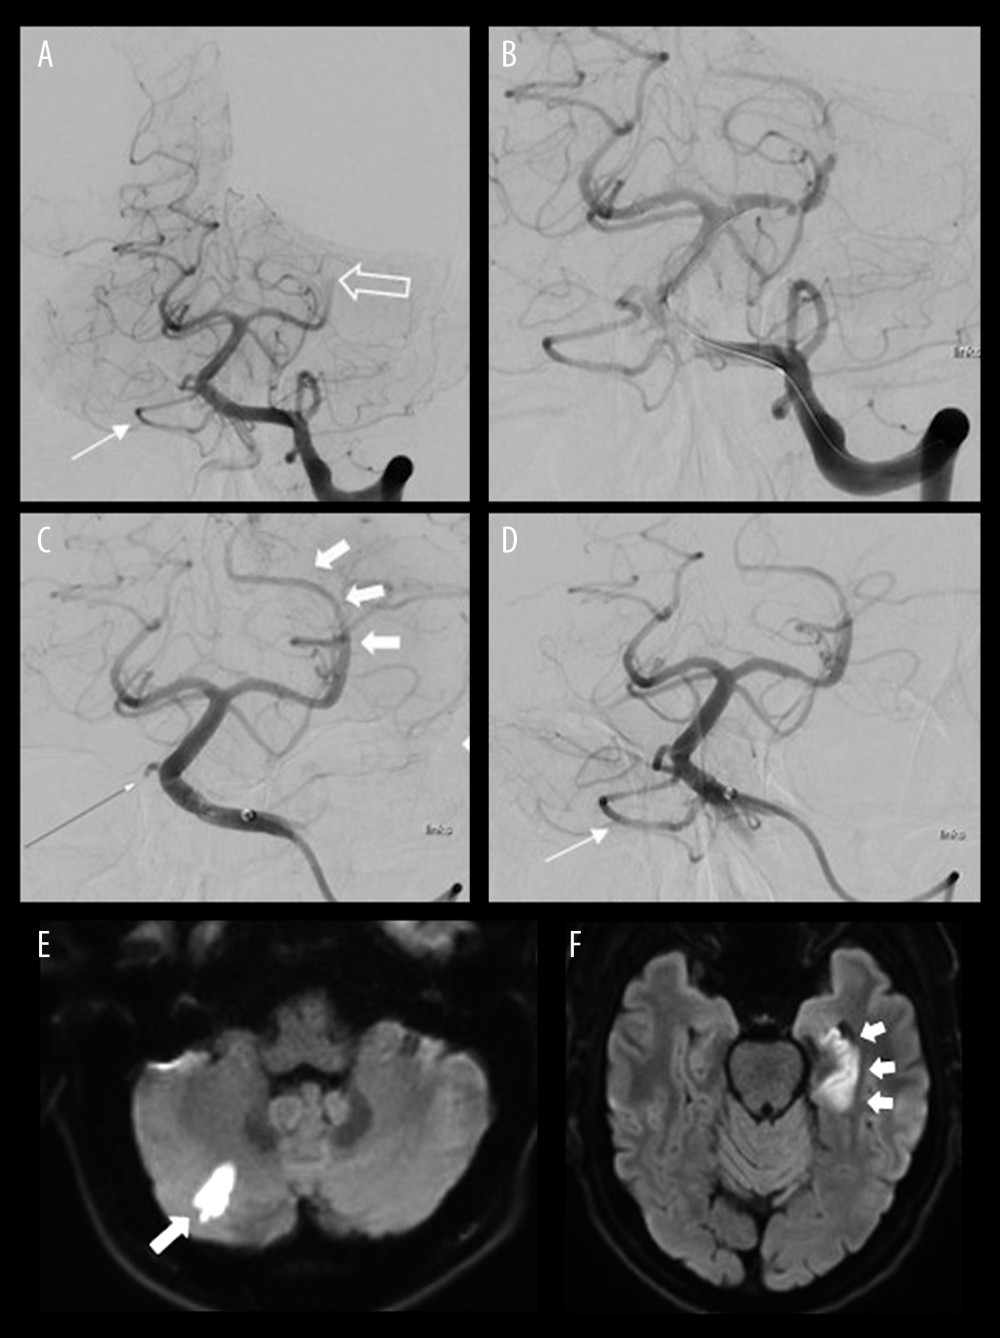 Digital Subtraction Angiography (DSA) and 24-hour control MRI in the Same Patient. DSA showing occlusion of the left posterior cerebral artery (PCA) in the P2 segment (empty arrow) with patent right posterior inferior cerebellar artery (PICA) (thin arrow) (A), with positioned stent retriever from the left P1 to the P2 segment (B). DSA showing complete recanalization of the PCA (thick arrows) and occlusion of the common origin of the right PICA and anterior inferior cerebellar artery (AICA) (thin arrow) due to partial thrombus dislocation (C). Post-procedural DSA showing complete reperfusion of the PICA and AICA (arrow) (D). 24-hour diffusion weighted imaging (DWI) showing a new subacute small cerebellar ischemia (arrow) in the right PICA territory (E) and 24-hour fluid-attenuated inversion recover (FLAIR) images showing the known left hippocampal infarction (arrows) (F).